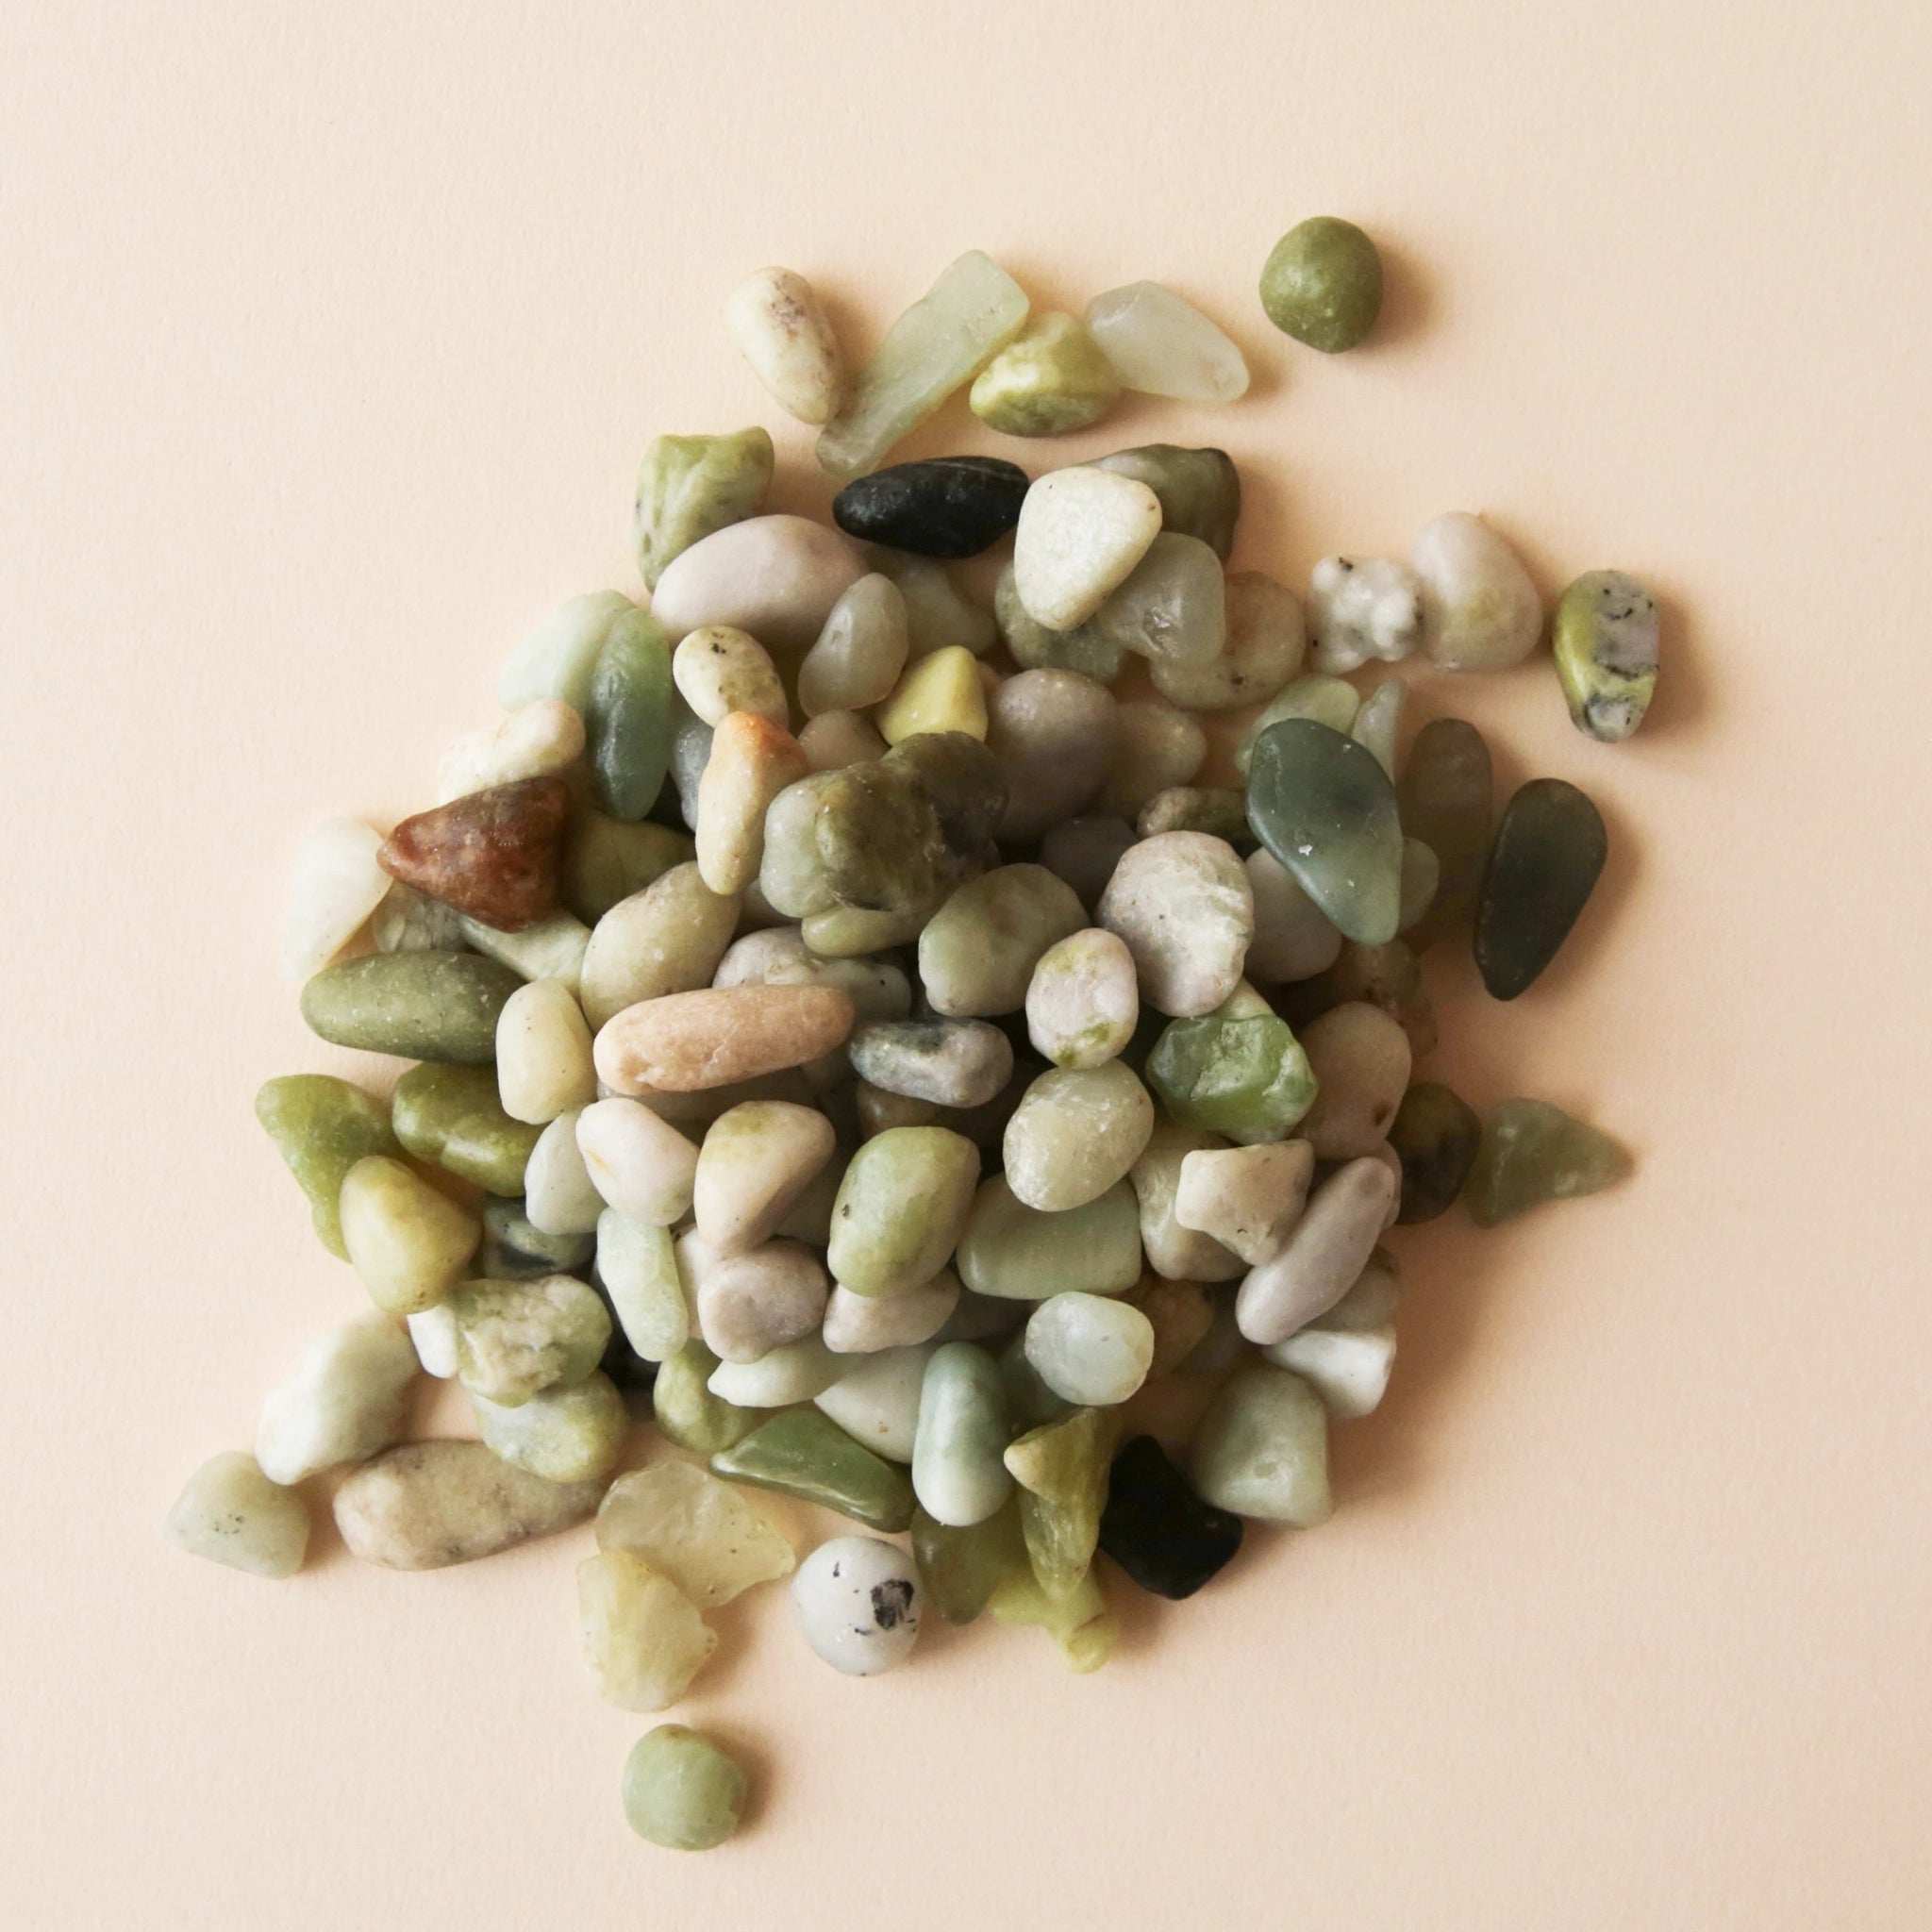 On a cream background is an assortment of light green and cream natural shaped stones. 